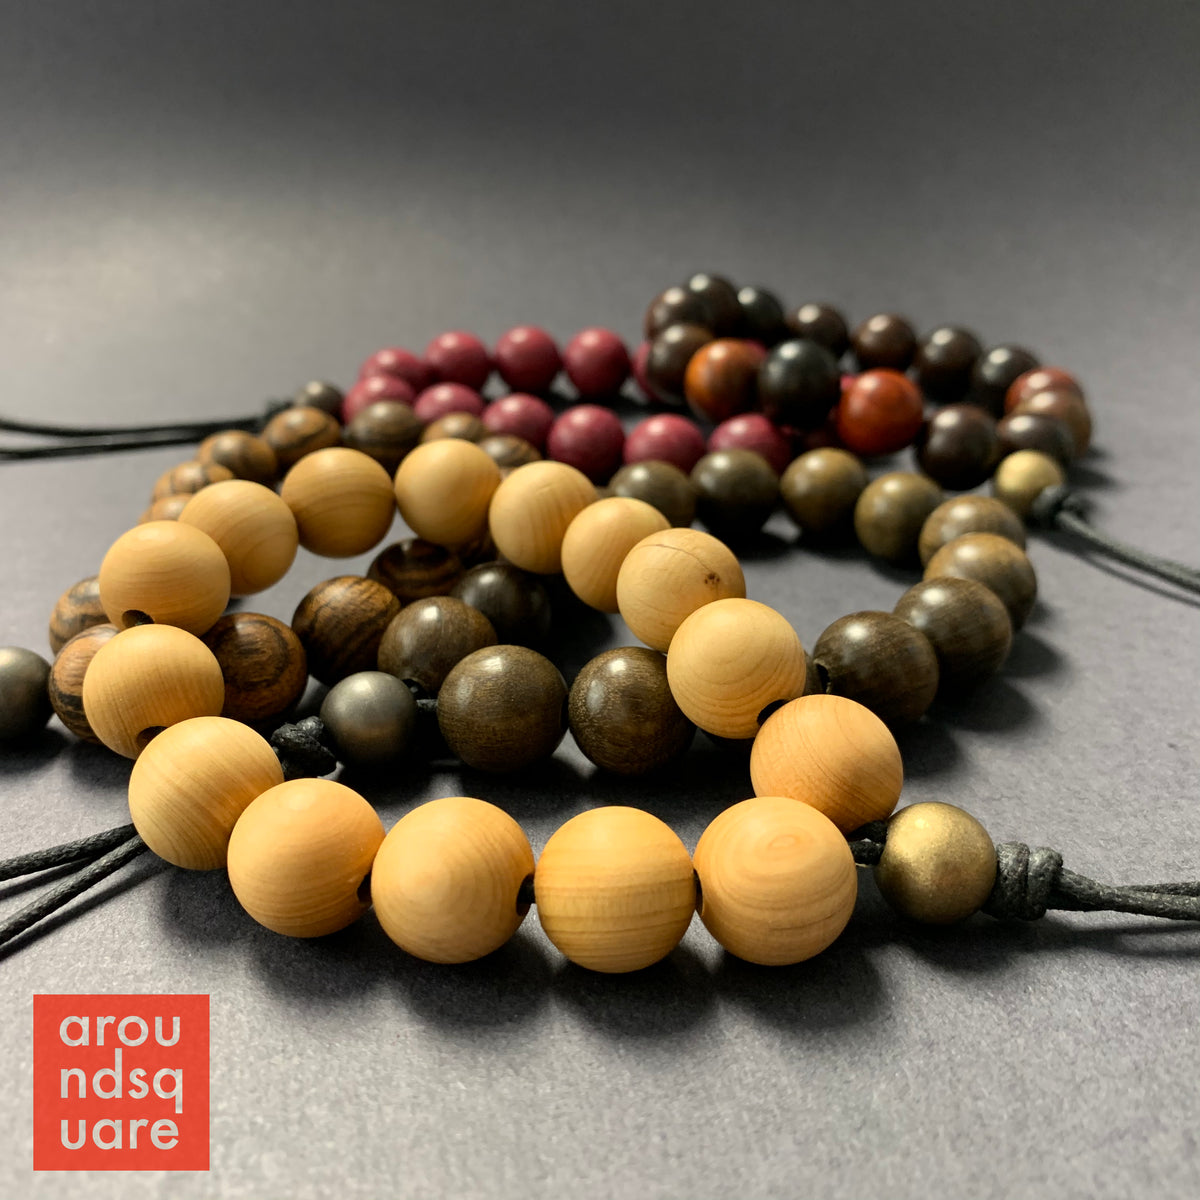 5-element Mala Board 02 mala Board / Mala Bead Board Made of Wood for Yoga  Chains, Malas, Bracelets up to 103 Cm Bead Design Board / Jewelry Board -   Israel